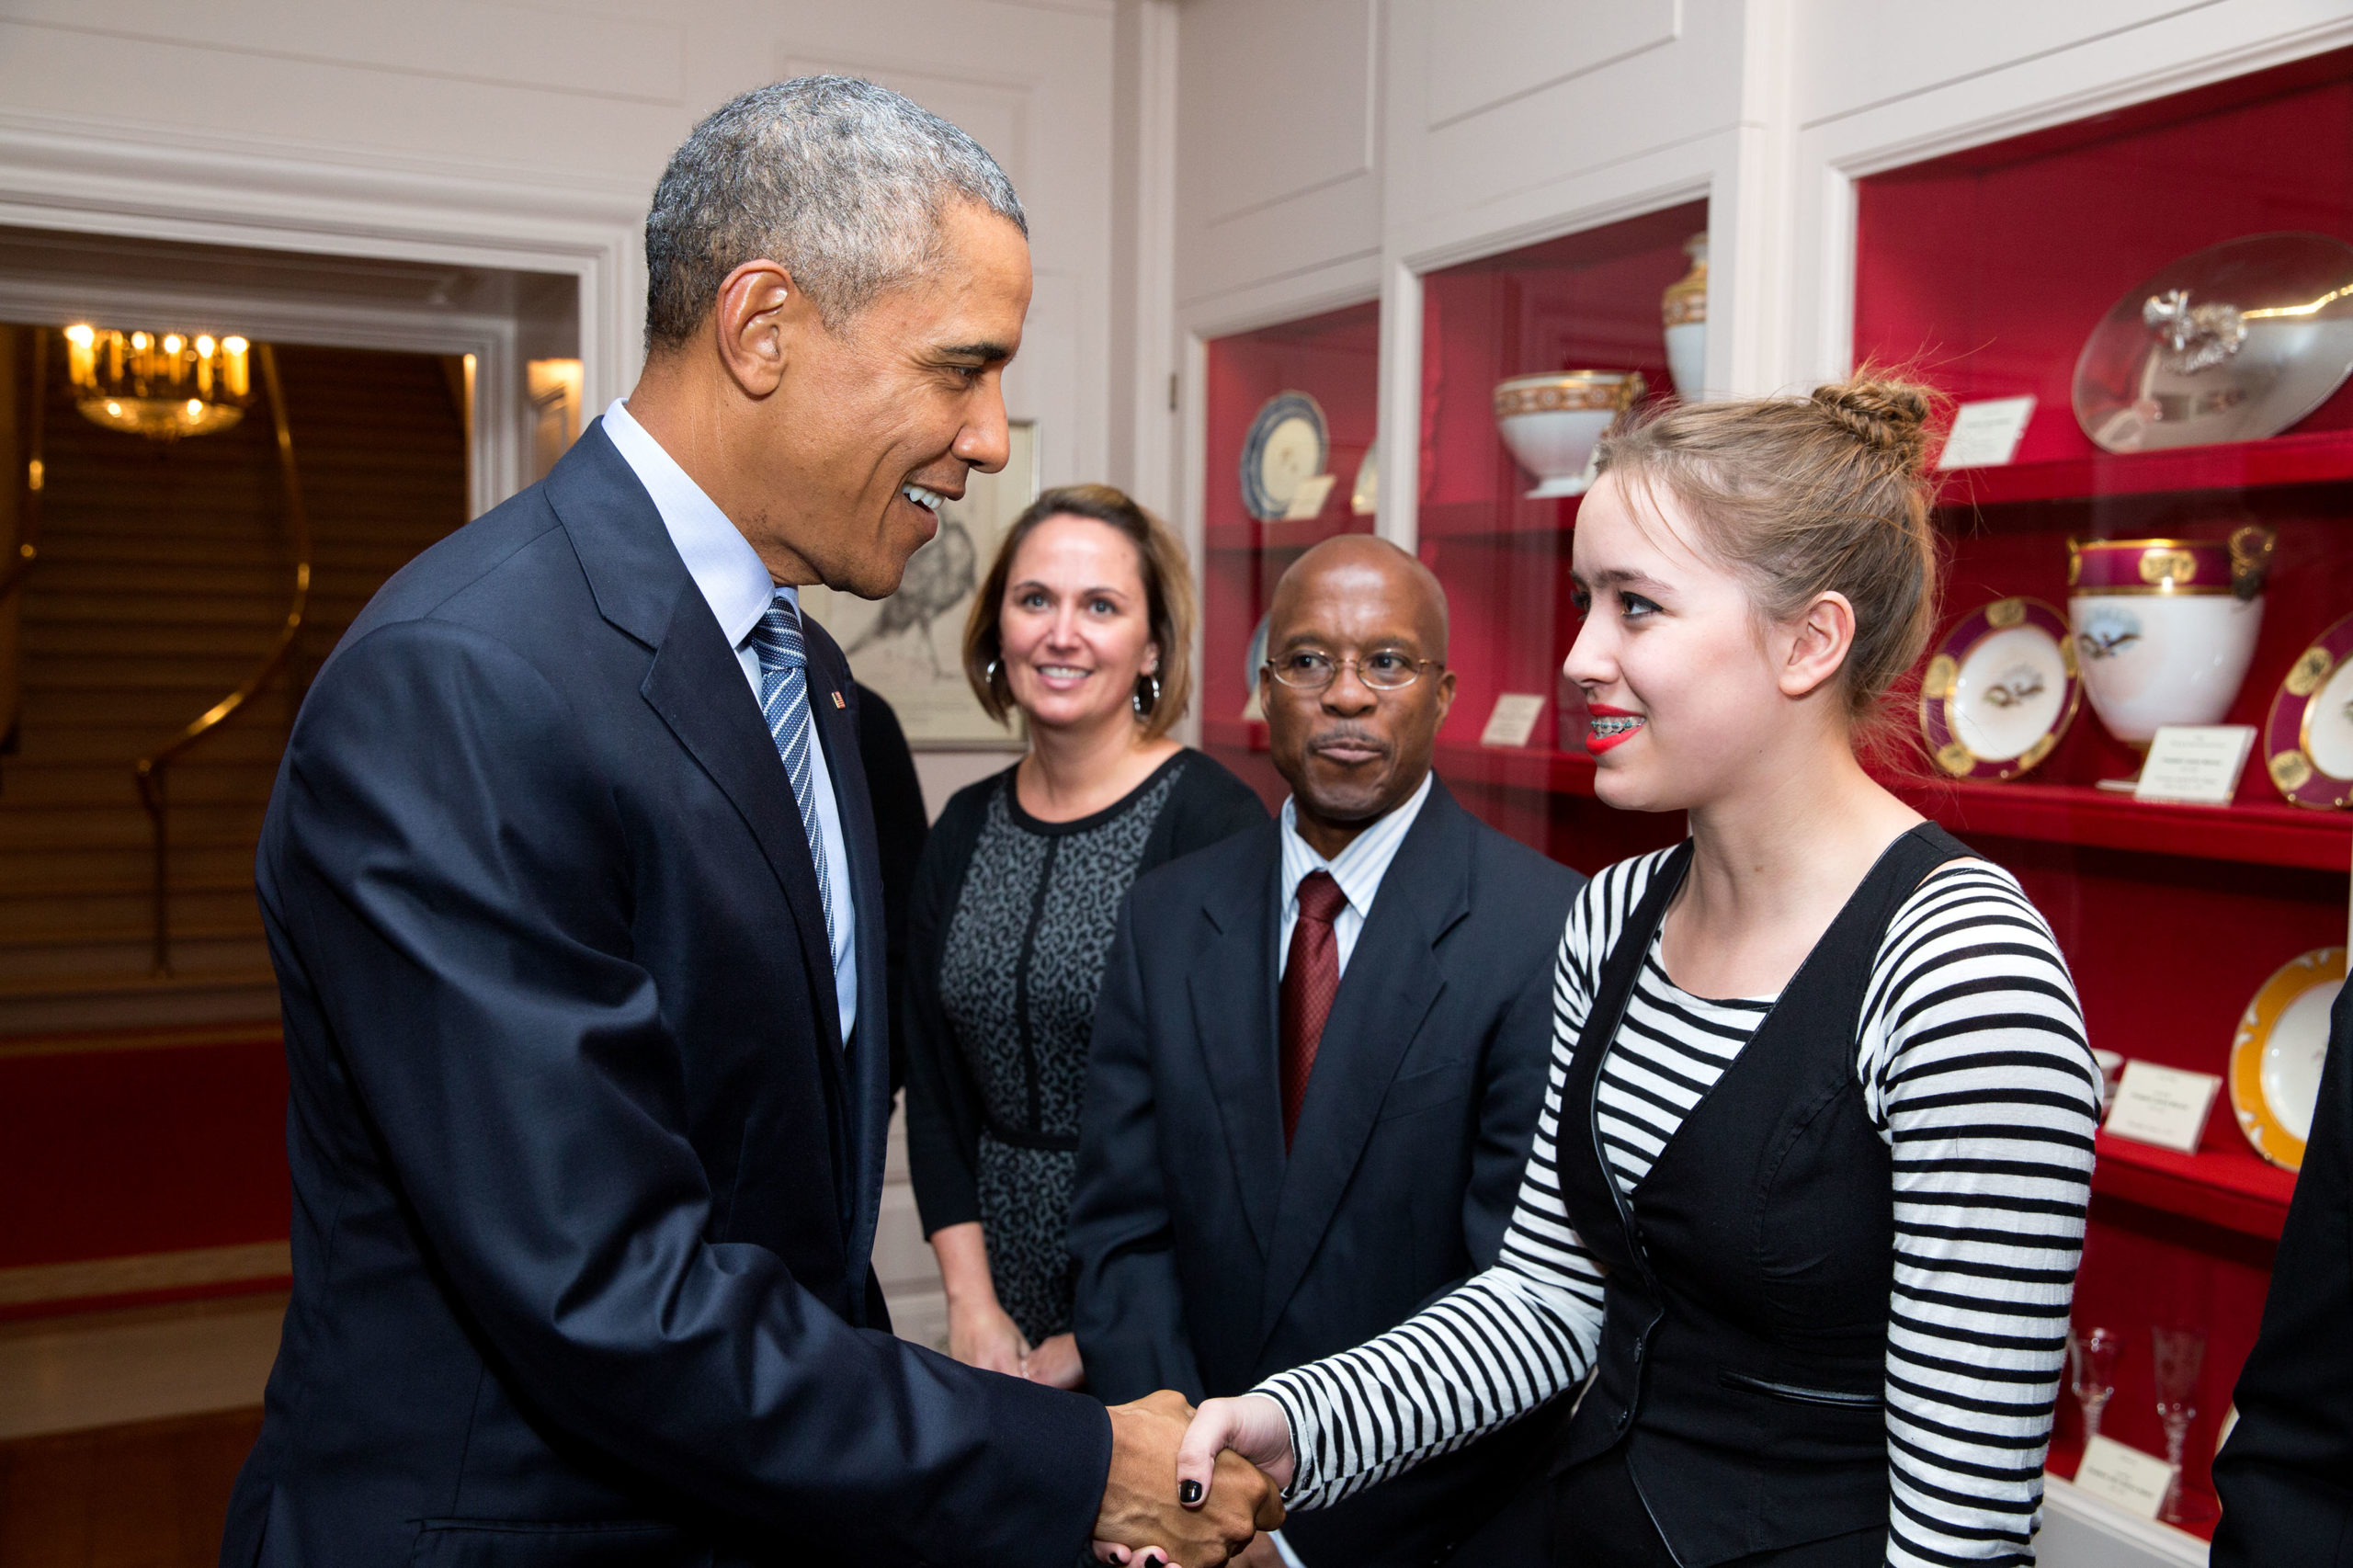 PING Student Meets President Obama